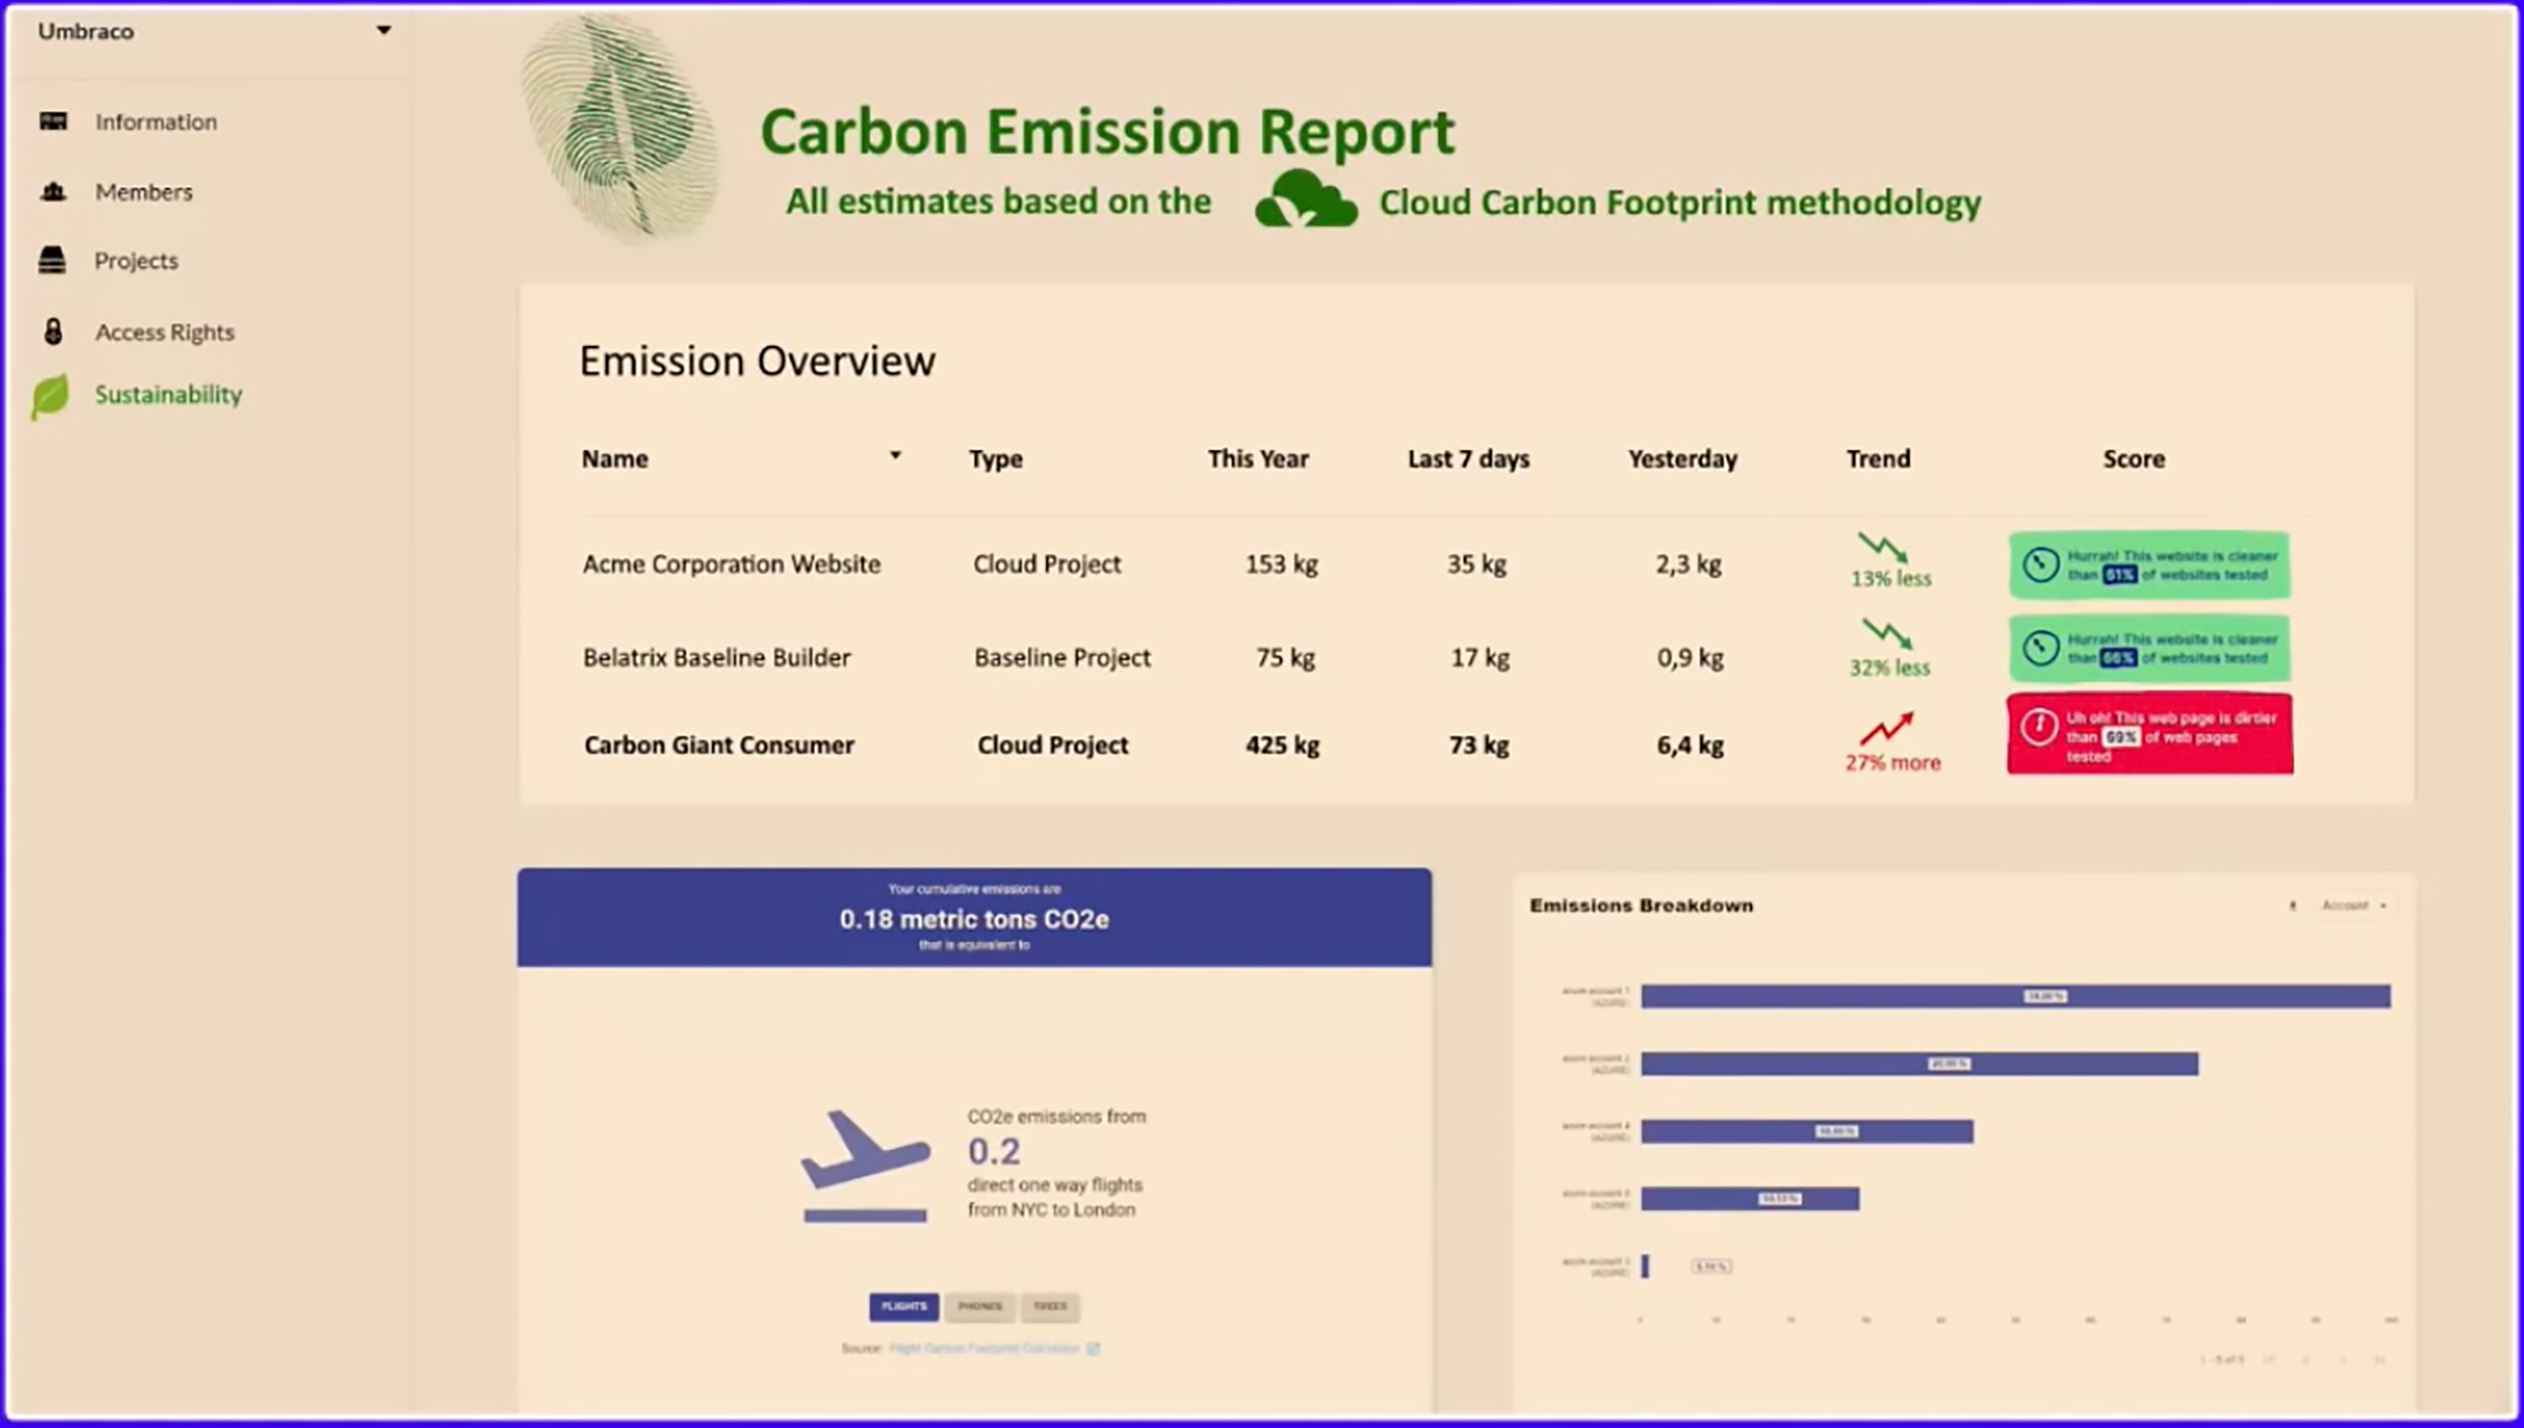 Umbaco Cloud Carbon Emission Report gives an overview of performance for all projects